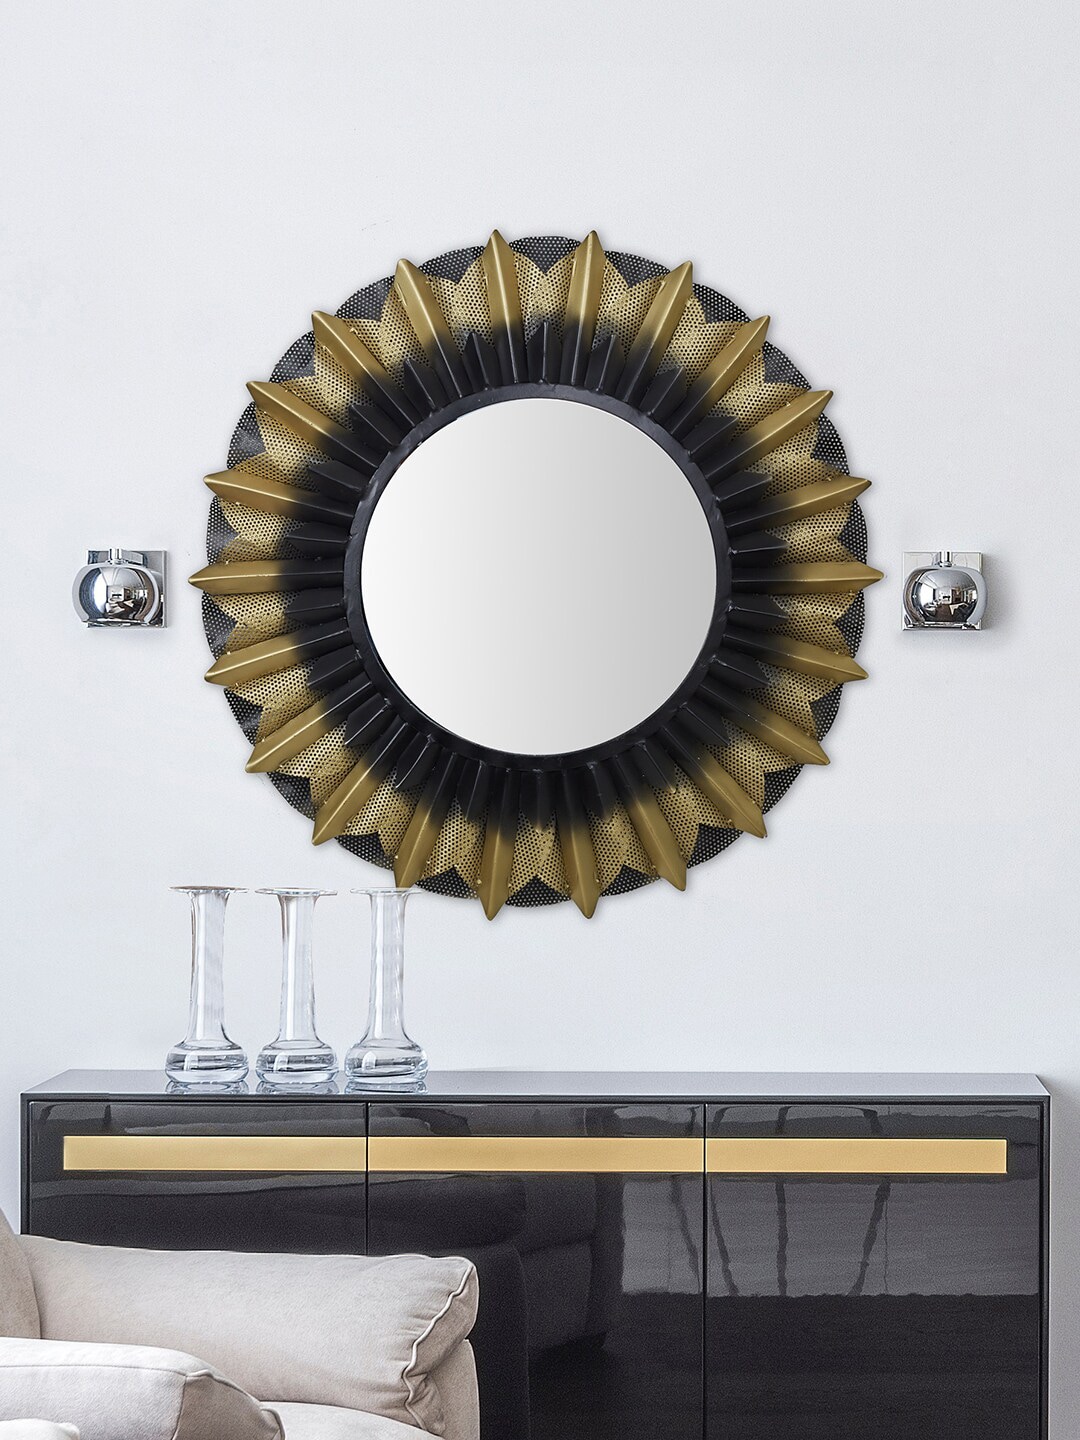 HomeTown Gold-Toned & Black Gothic Patterned Wall Mirrors Price in India